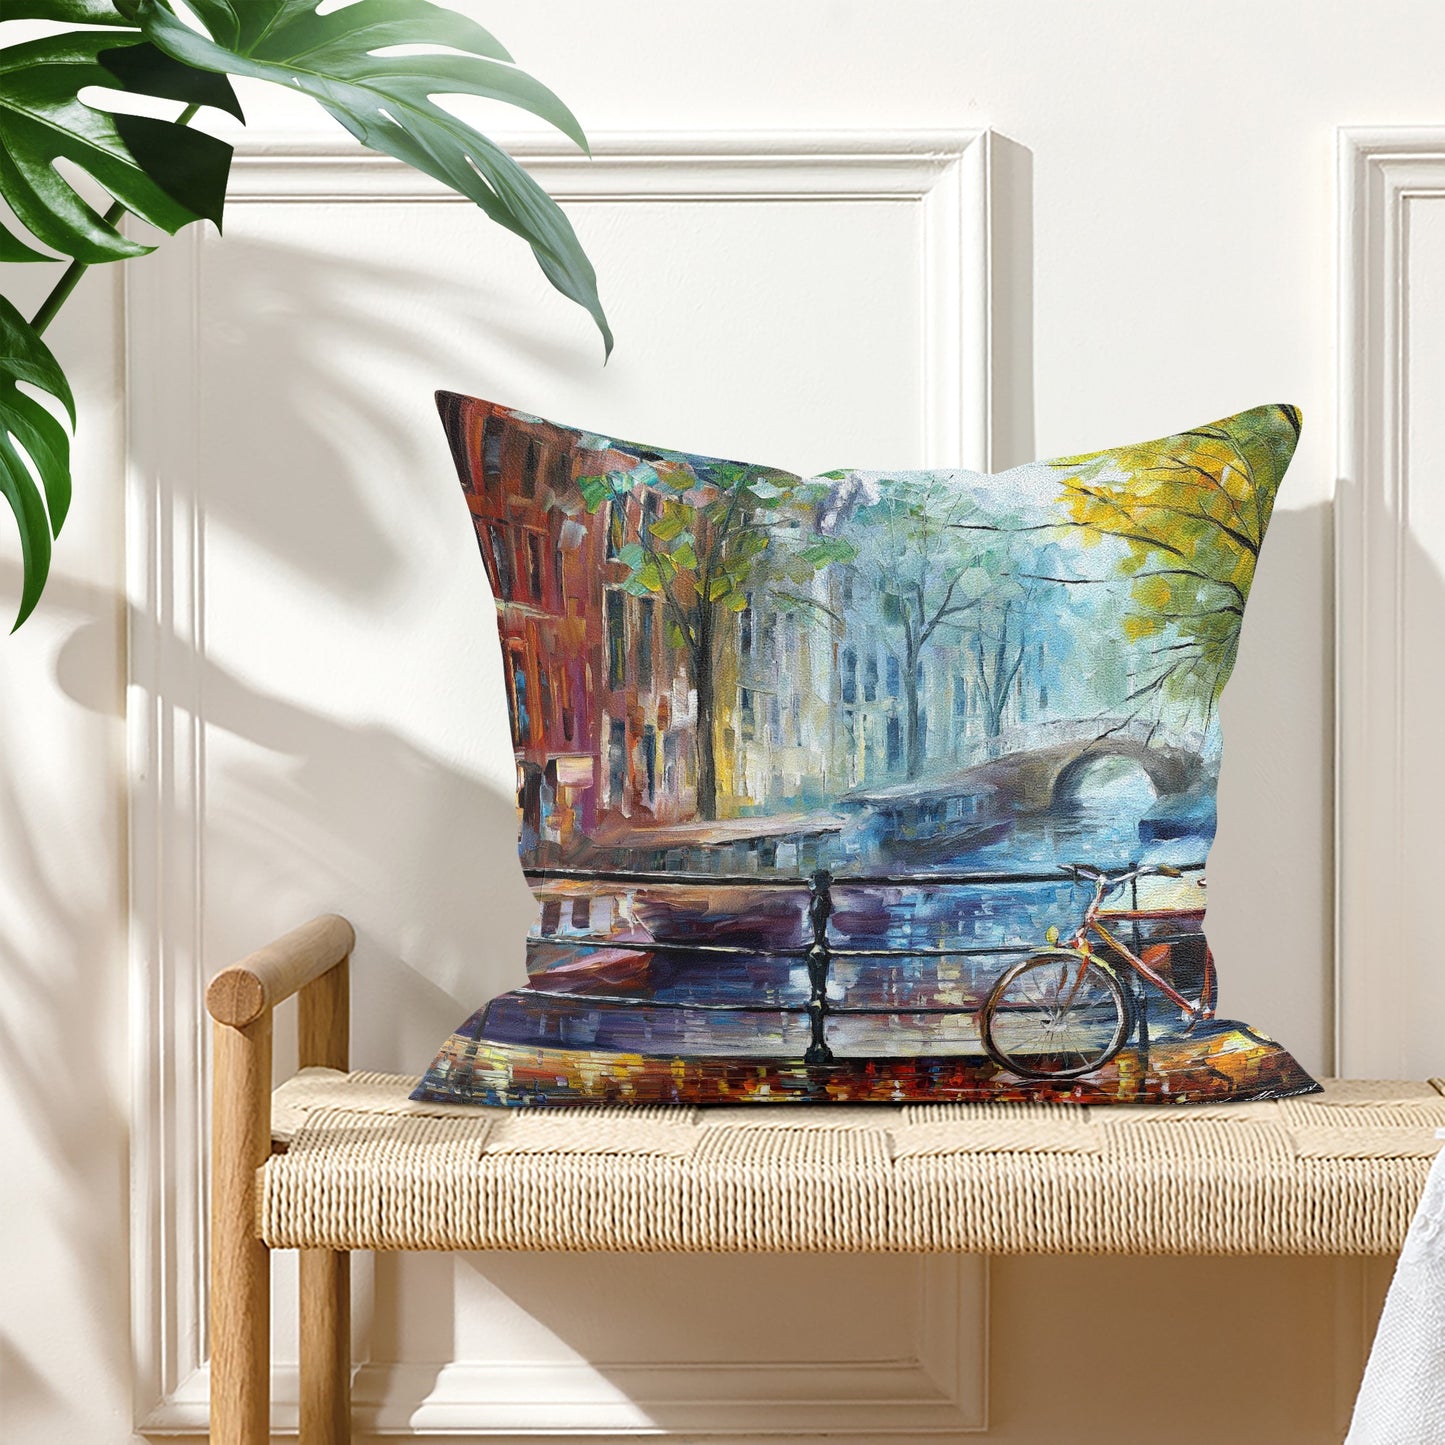 Double Side Printing Pillow Cover Afremov BICYCLE IN AMSTERDAM